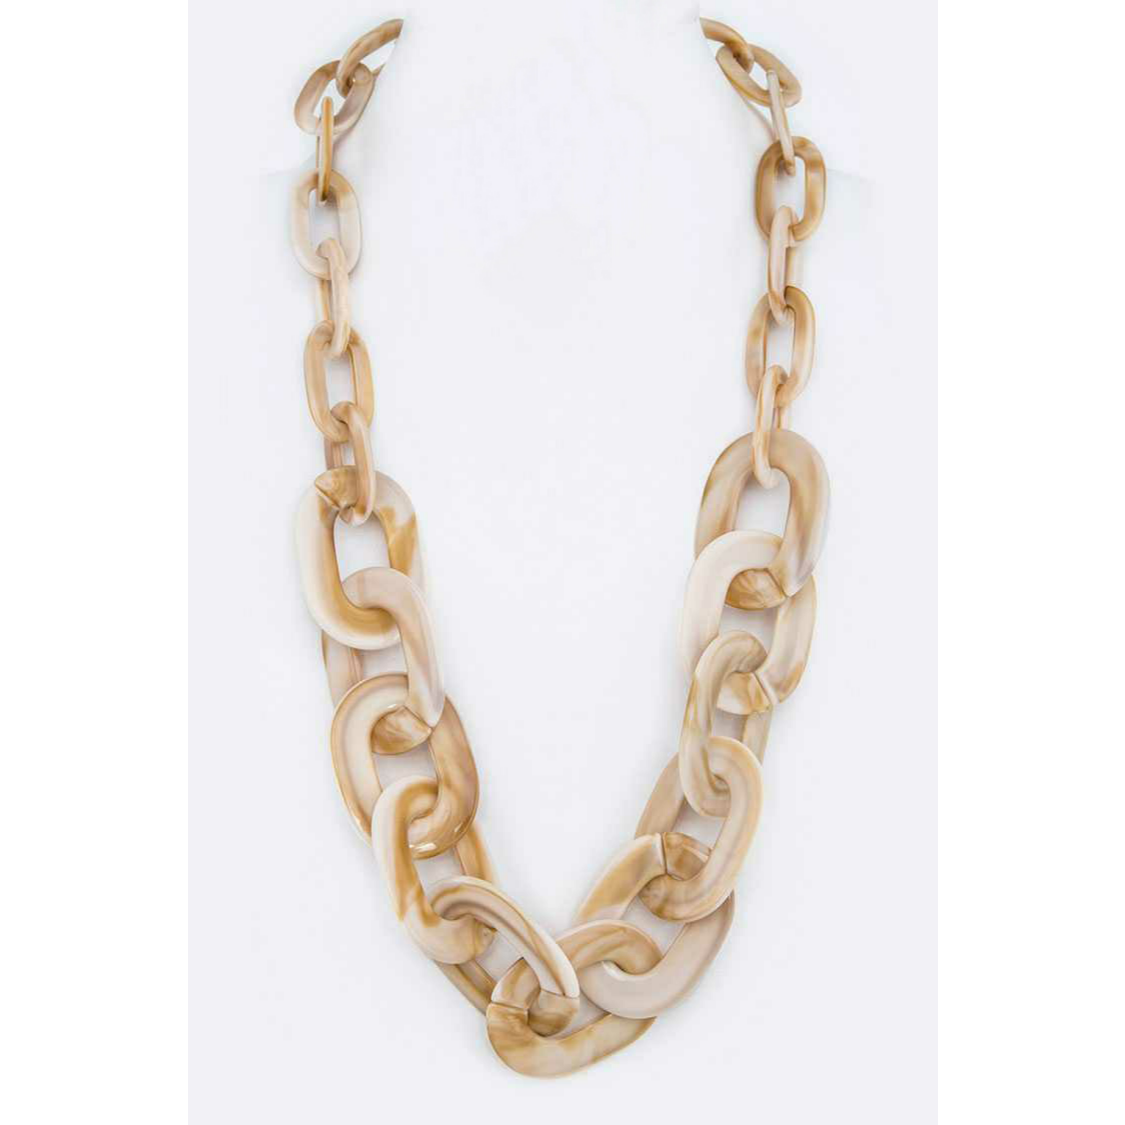 Resin Chain Link Necklace - Cream